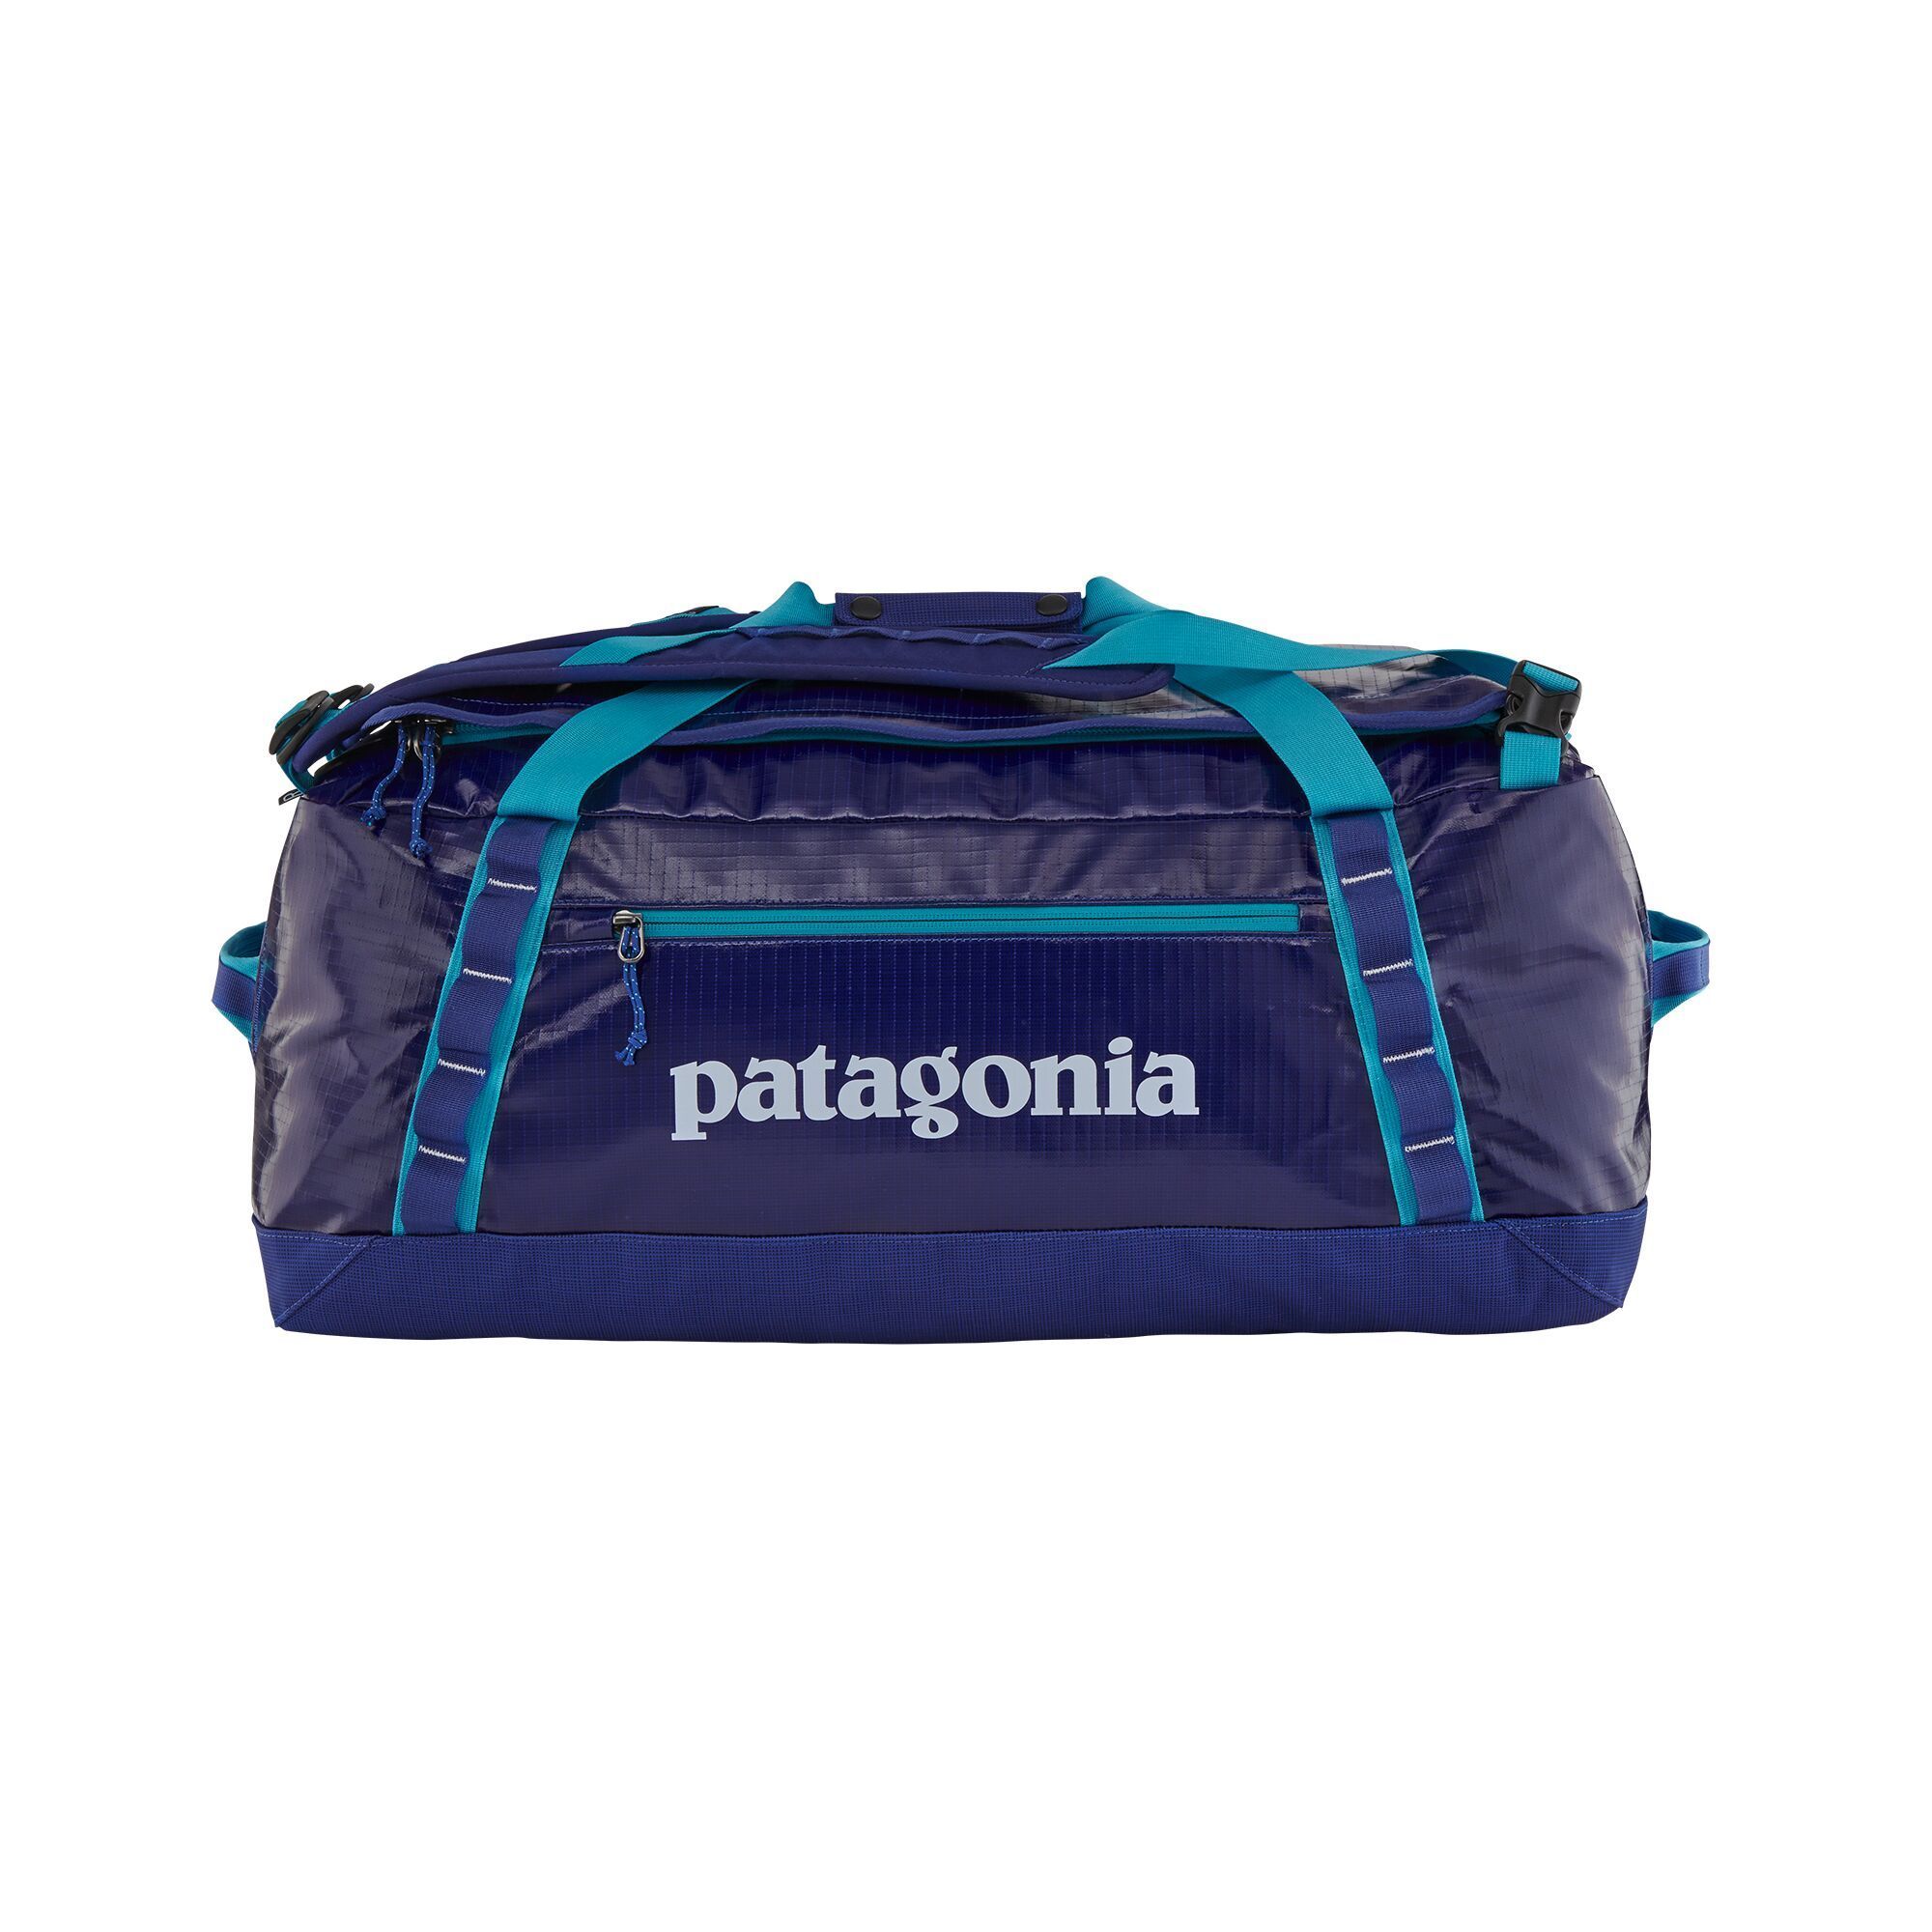 Patagonia Black Hole Duffel Bag 55L - 100 % Recycled Polyester, Cobalt Blue